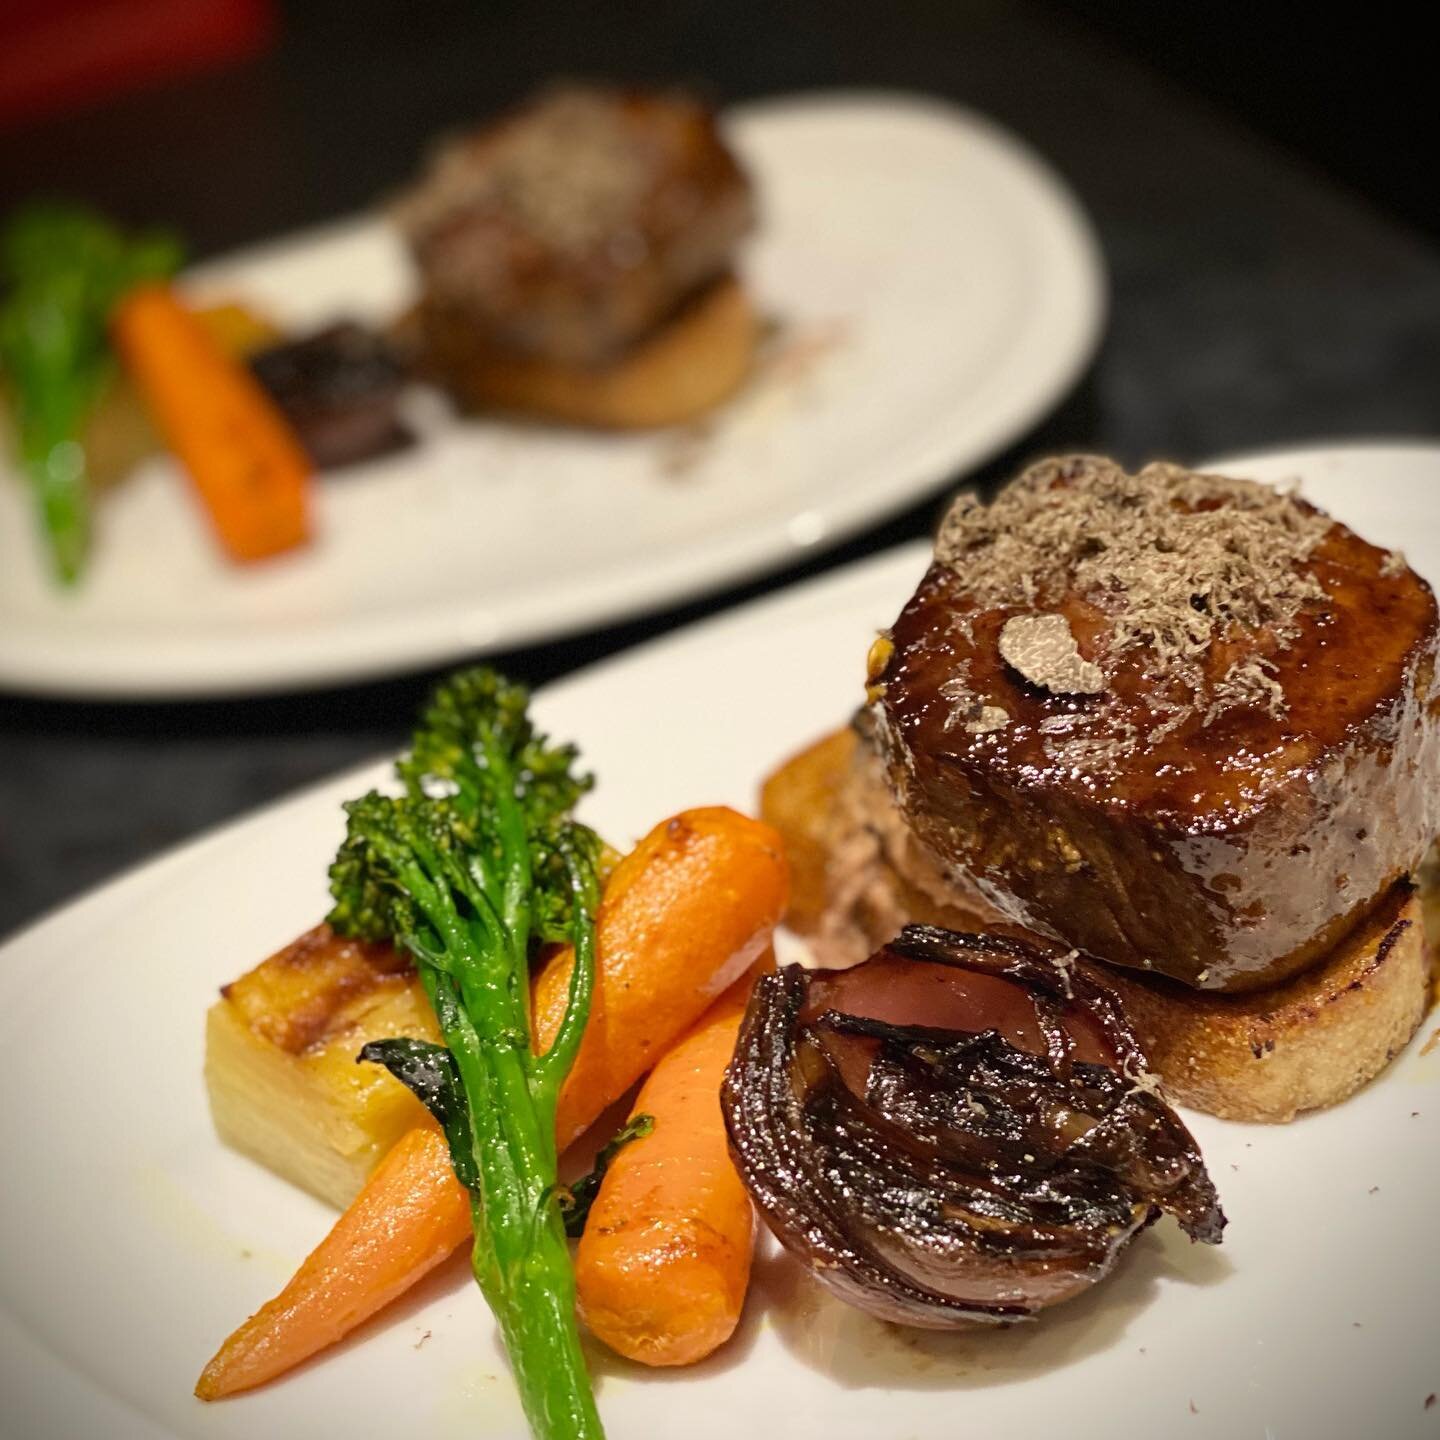 Fillet steak with Madeira gravy and truffle Tasting menu for two.  #privatechef #gourmetcatering #hampshirechef #dinnerparty #specialocassion #dorsetchef #dinnerparty #delivery #gourmetdining #homechef #delivery #hampshire #winchester #newforest